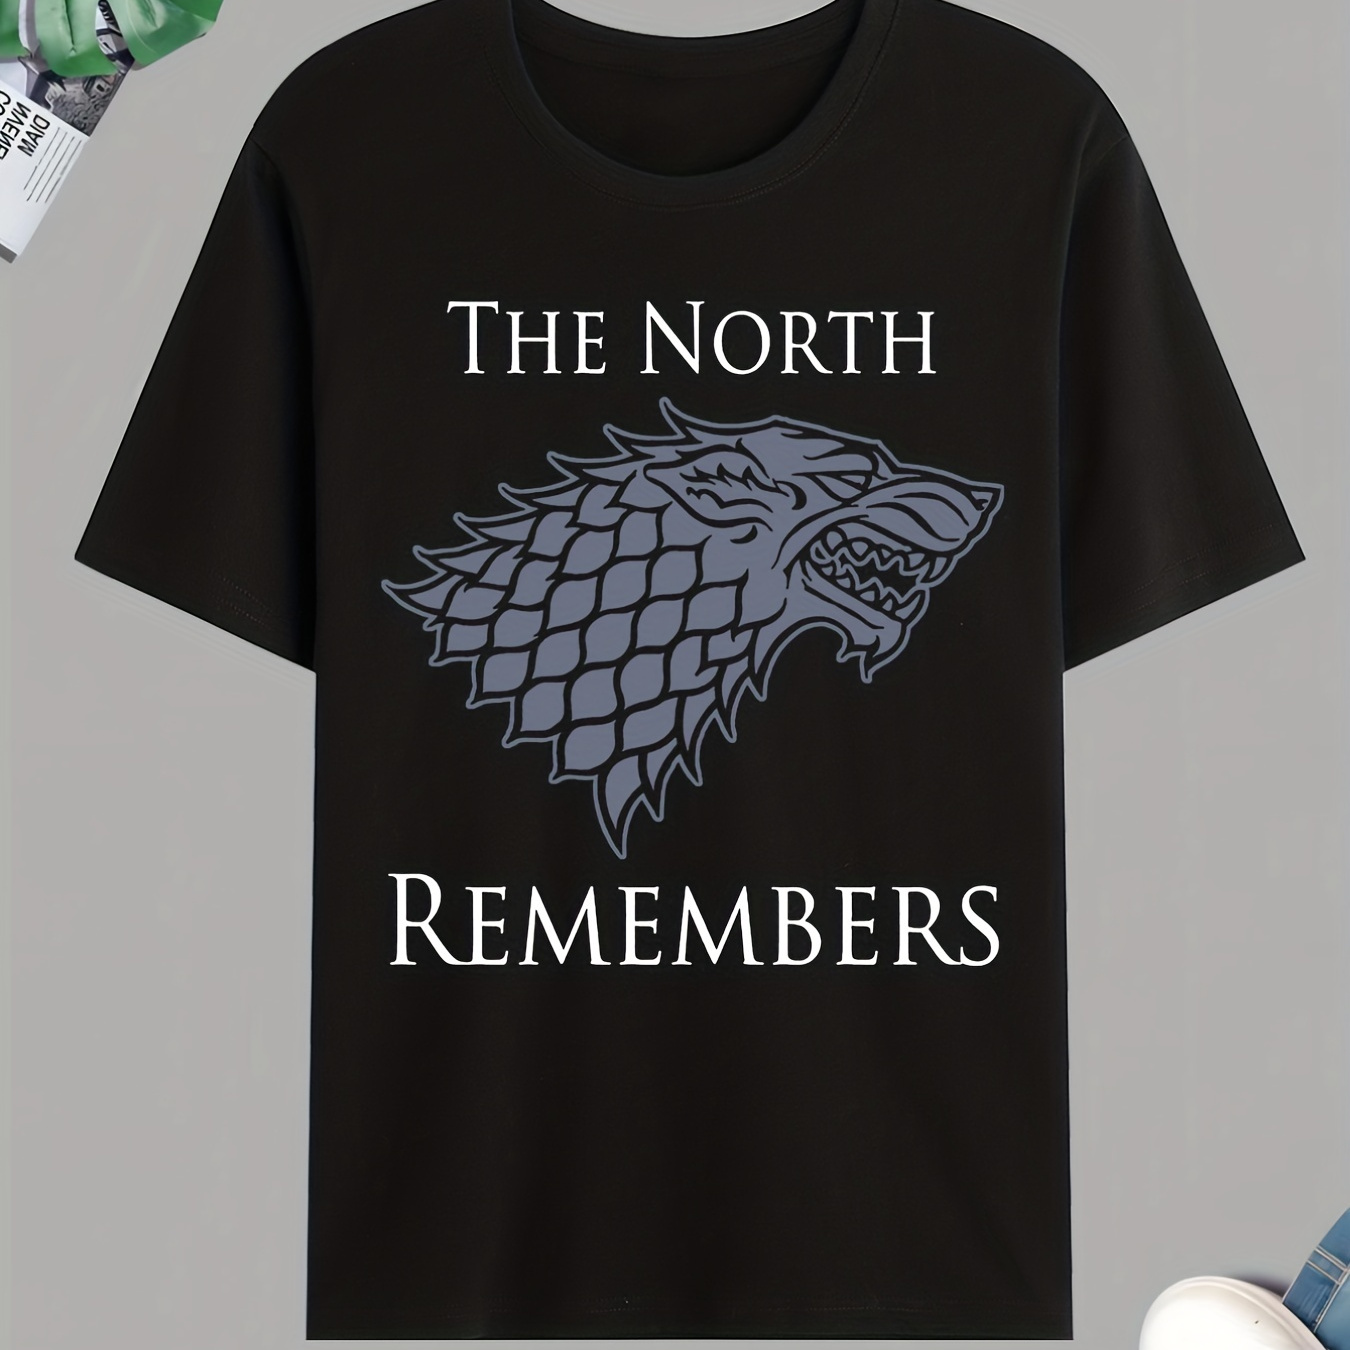 

'remember The North' Print T Shirt, Tees For Men, Casual Short Sleeve Tshirt For Summer Spring Fall, Tops As Gifts